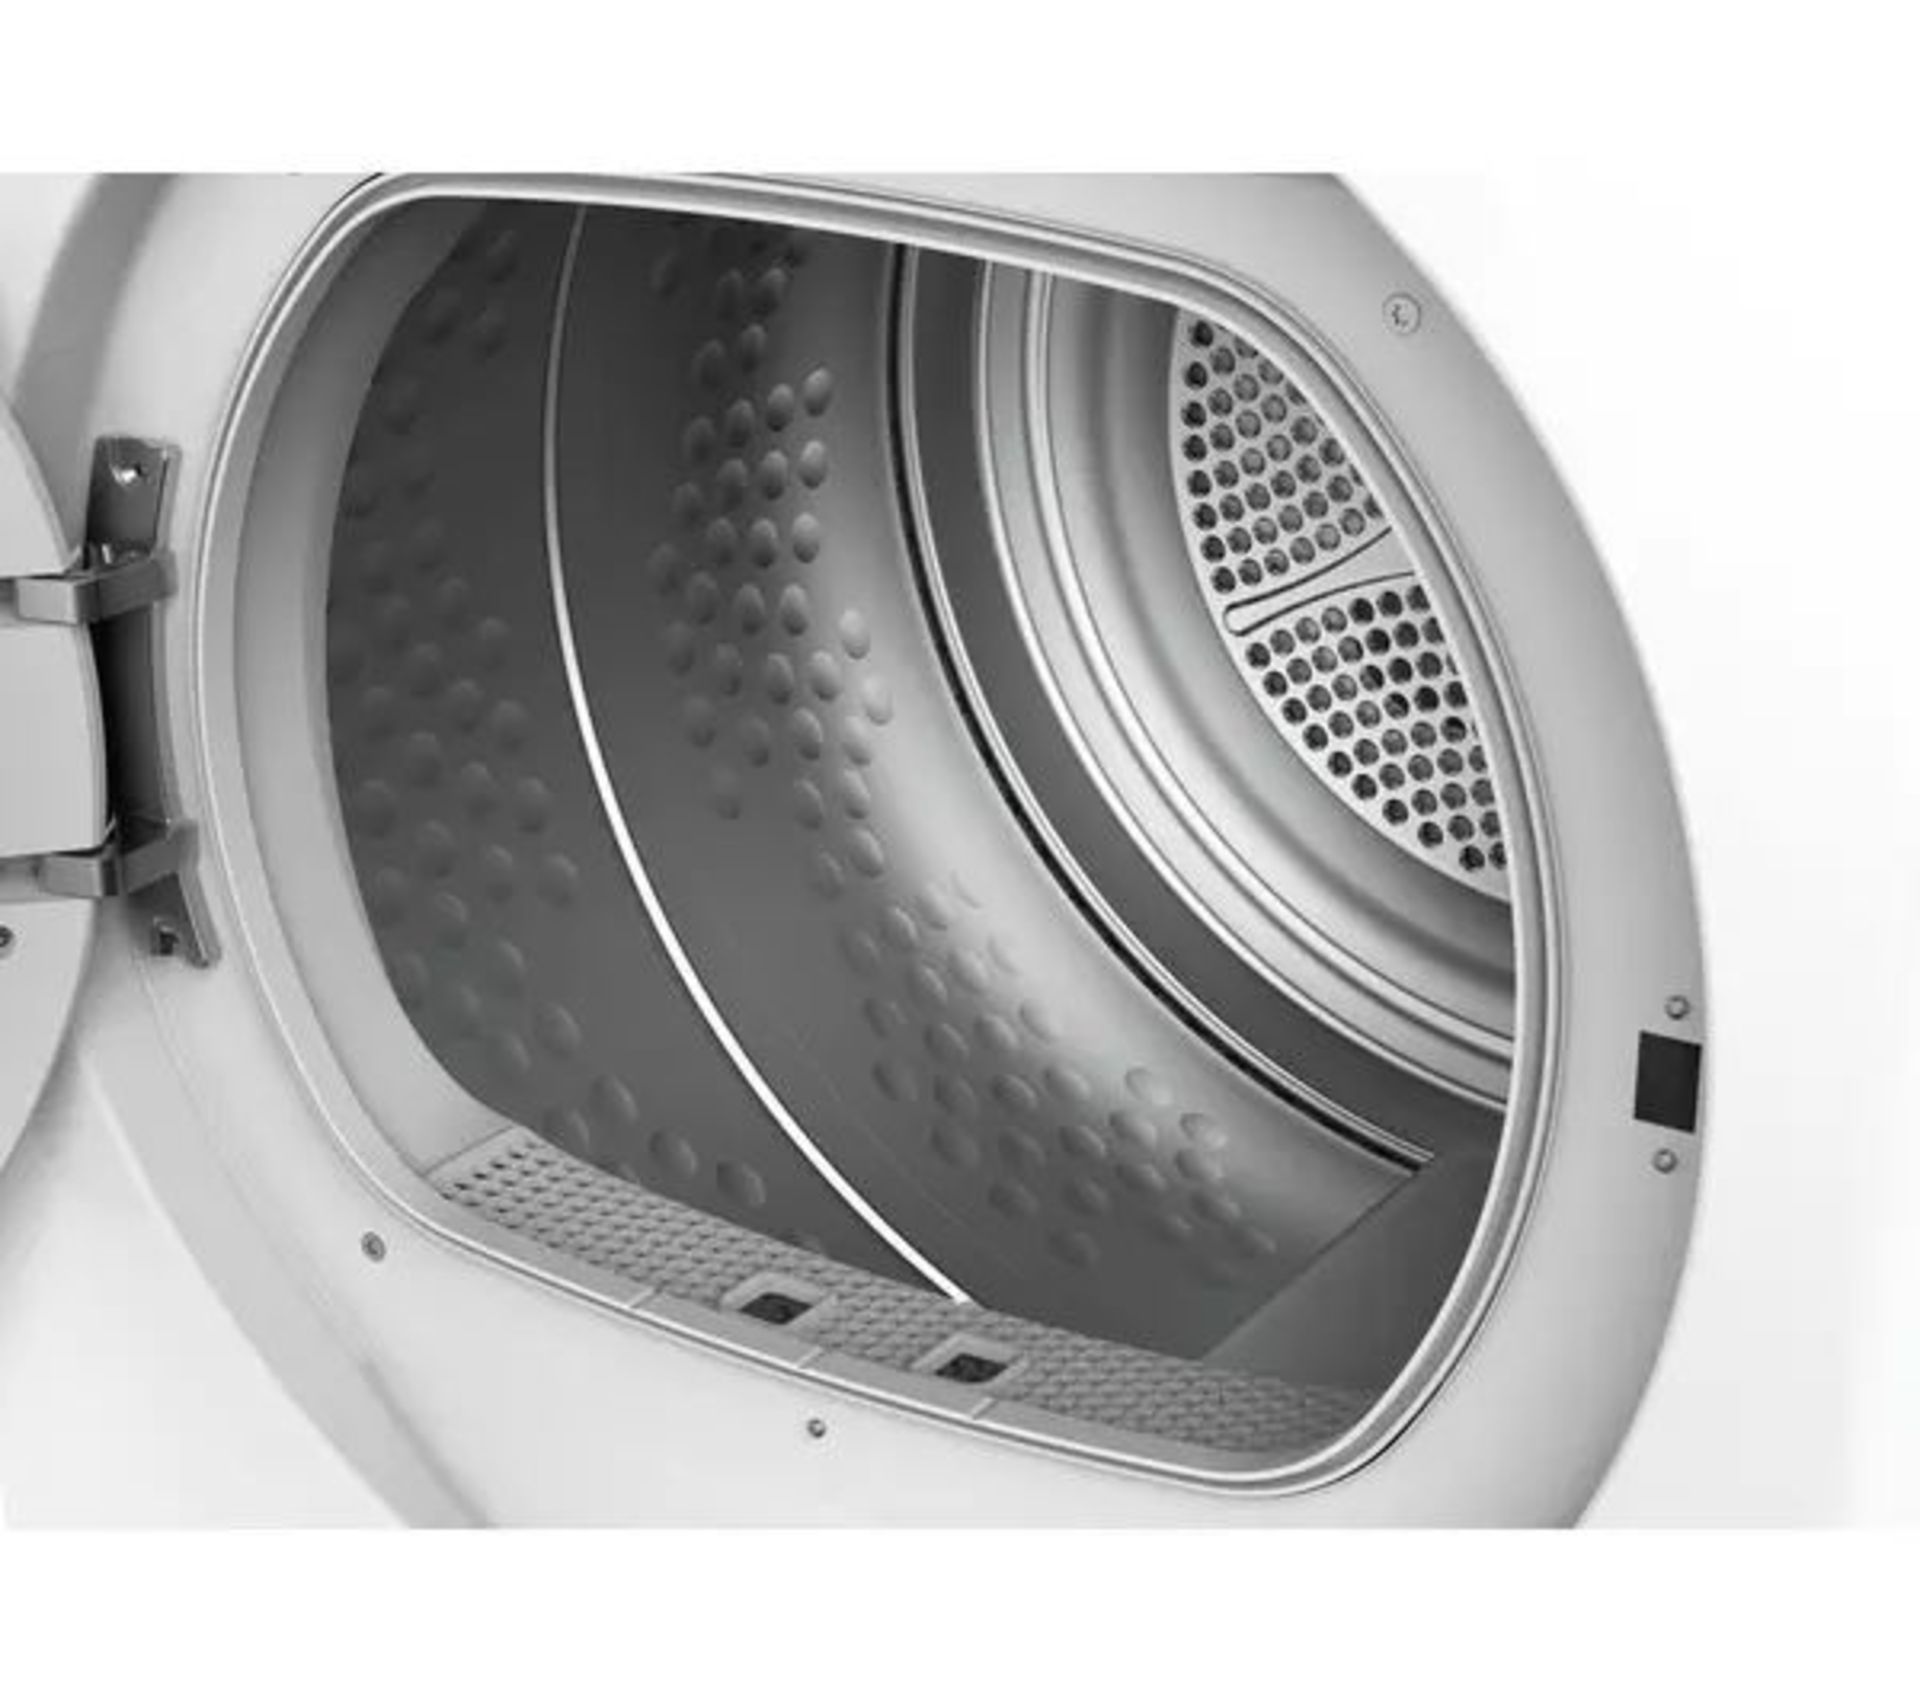 CANDY CSE C9DF80 NFC 9kg Condenser Tumble Dryer - White. - S2. RRP £399.00. This Candy tumble - Image 2 of 2